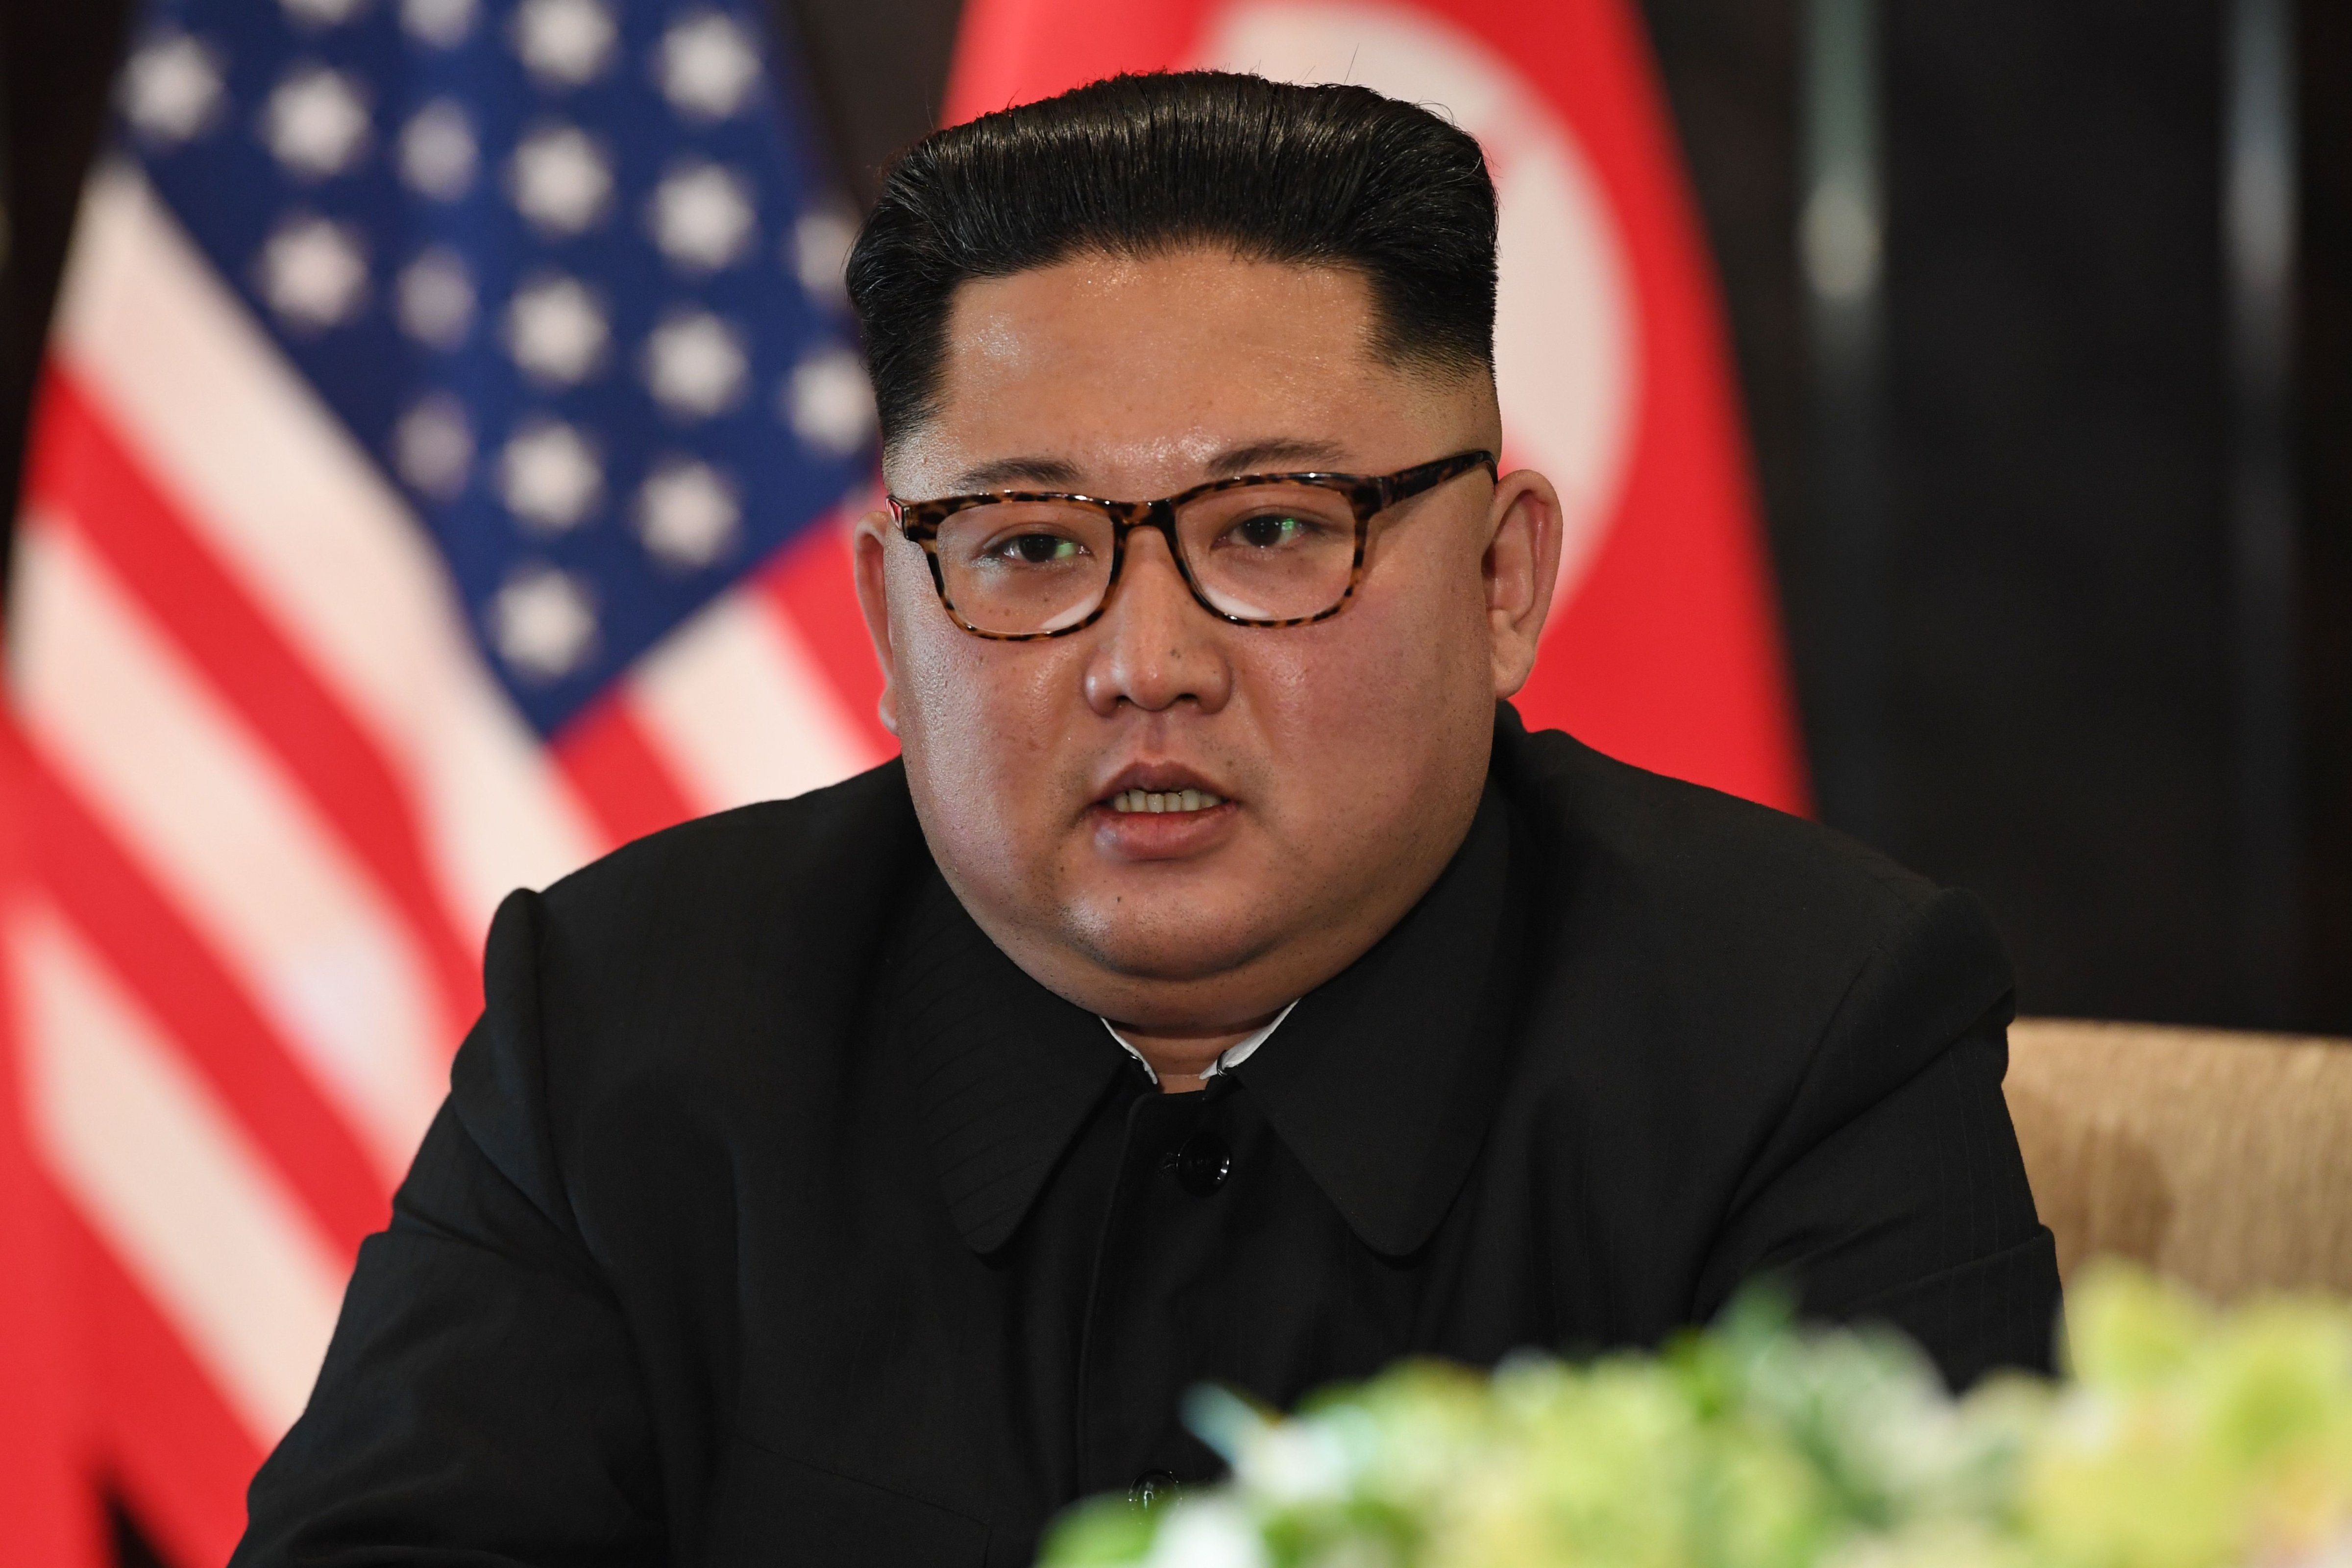 North Korea's leader Kim Jong Un during the U.S.-North Korea summit, at the Capella Hotel on Sentosa island in Singapore on June 12, 2018. (Saul Loeb—AFP/Getty Images)